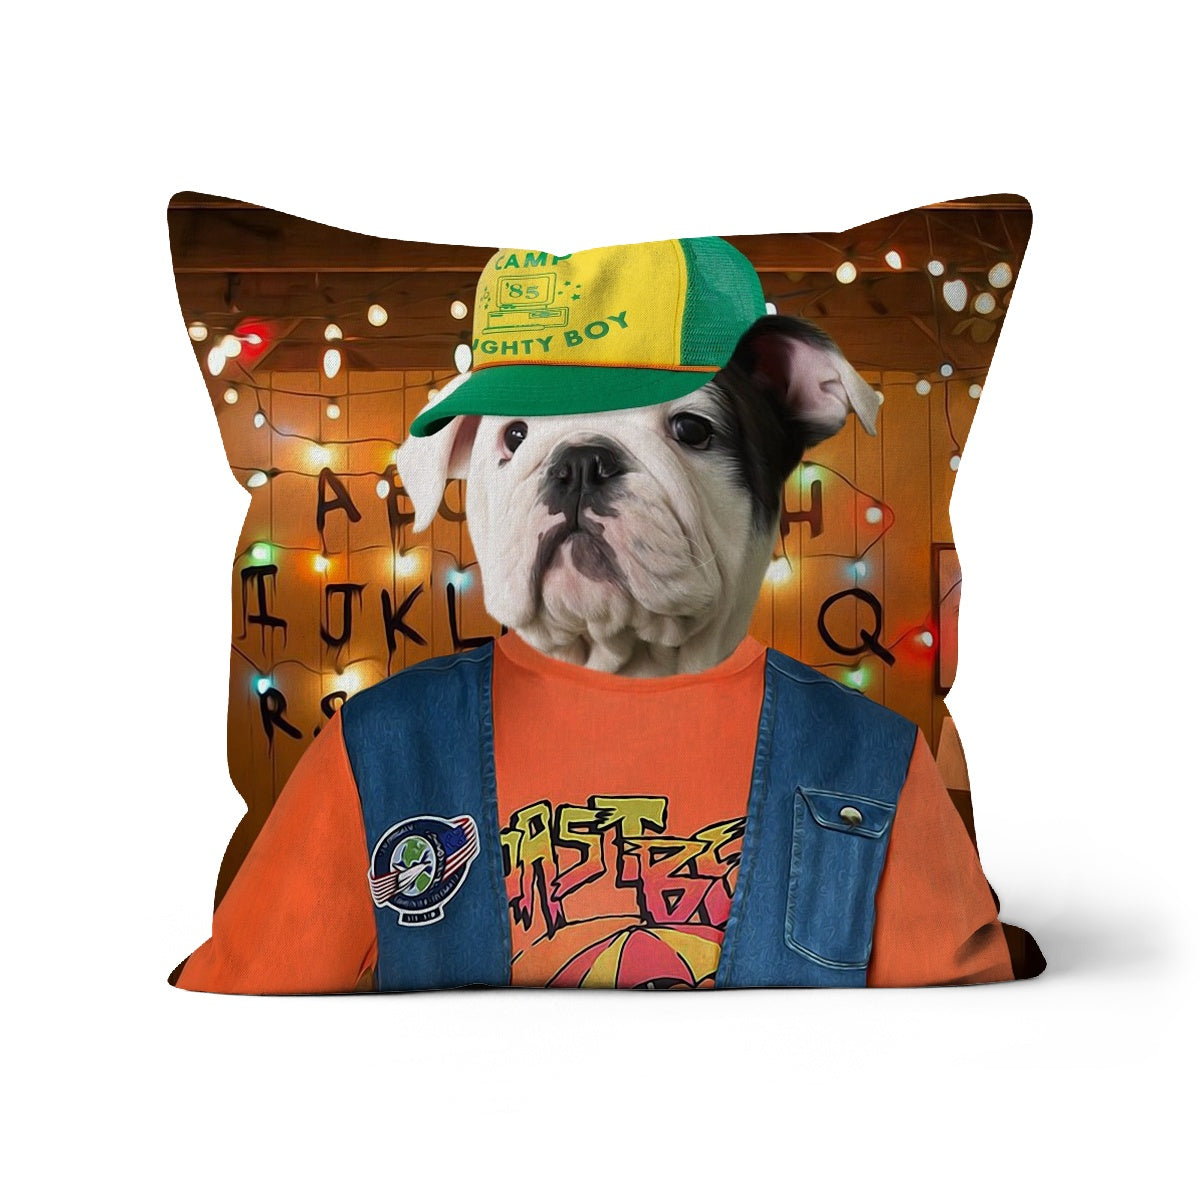 The Dustin (Stranger Things Inspired) Paw & Glory, pawandglory, Pet Portrait cushion, dog personalized pillow, pillows with dogs picture, custom printed pillows, my pet pillow, customized throw pillows, photo dog pillows